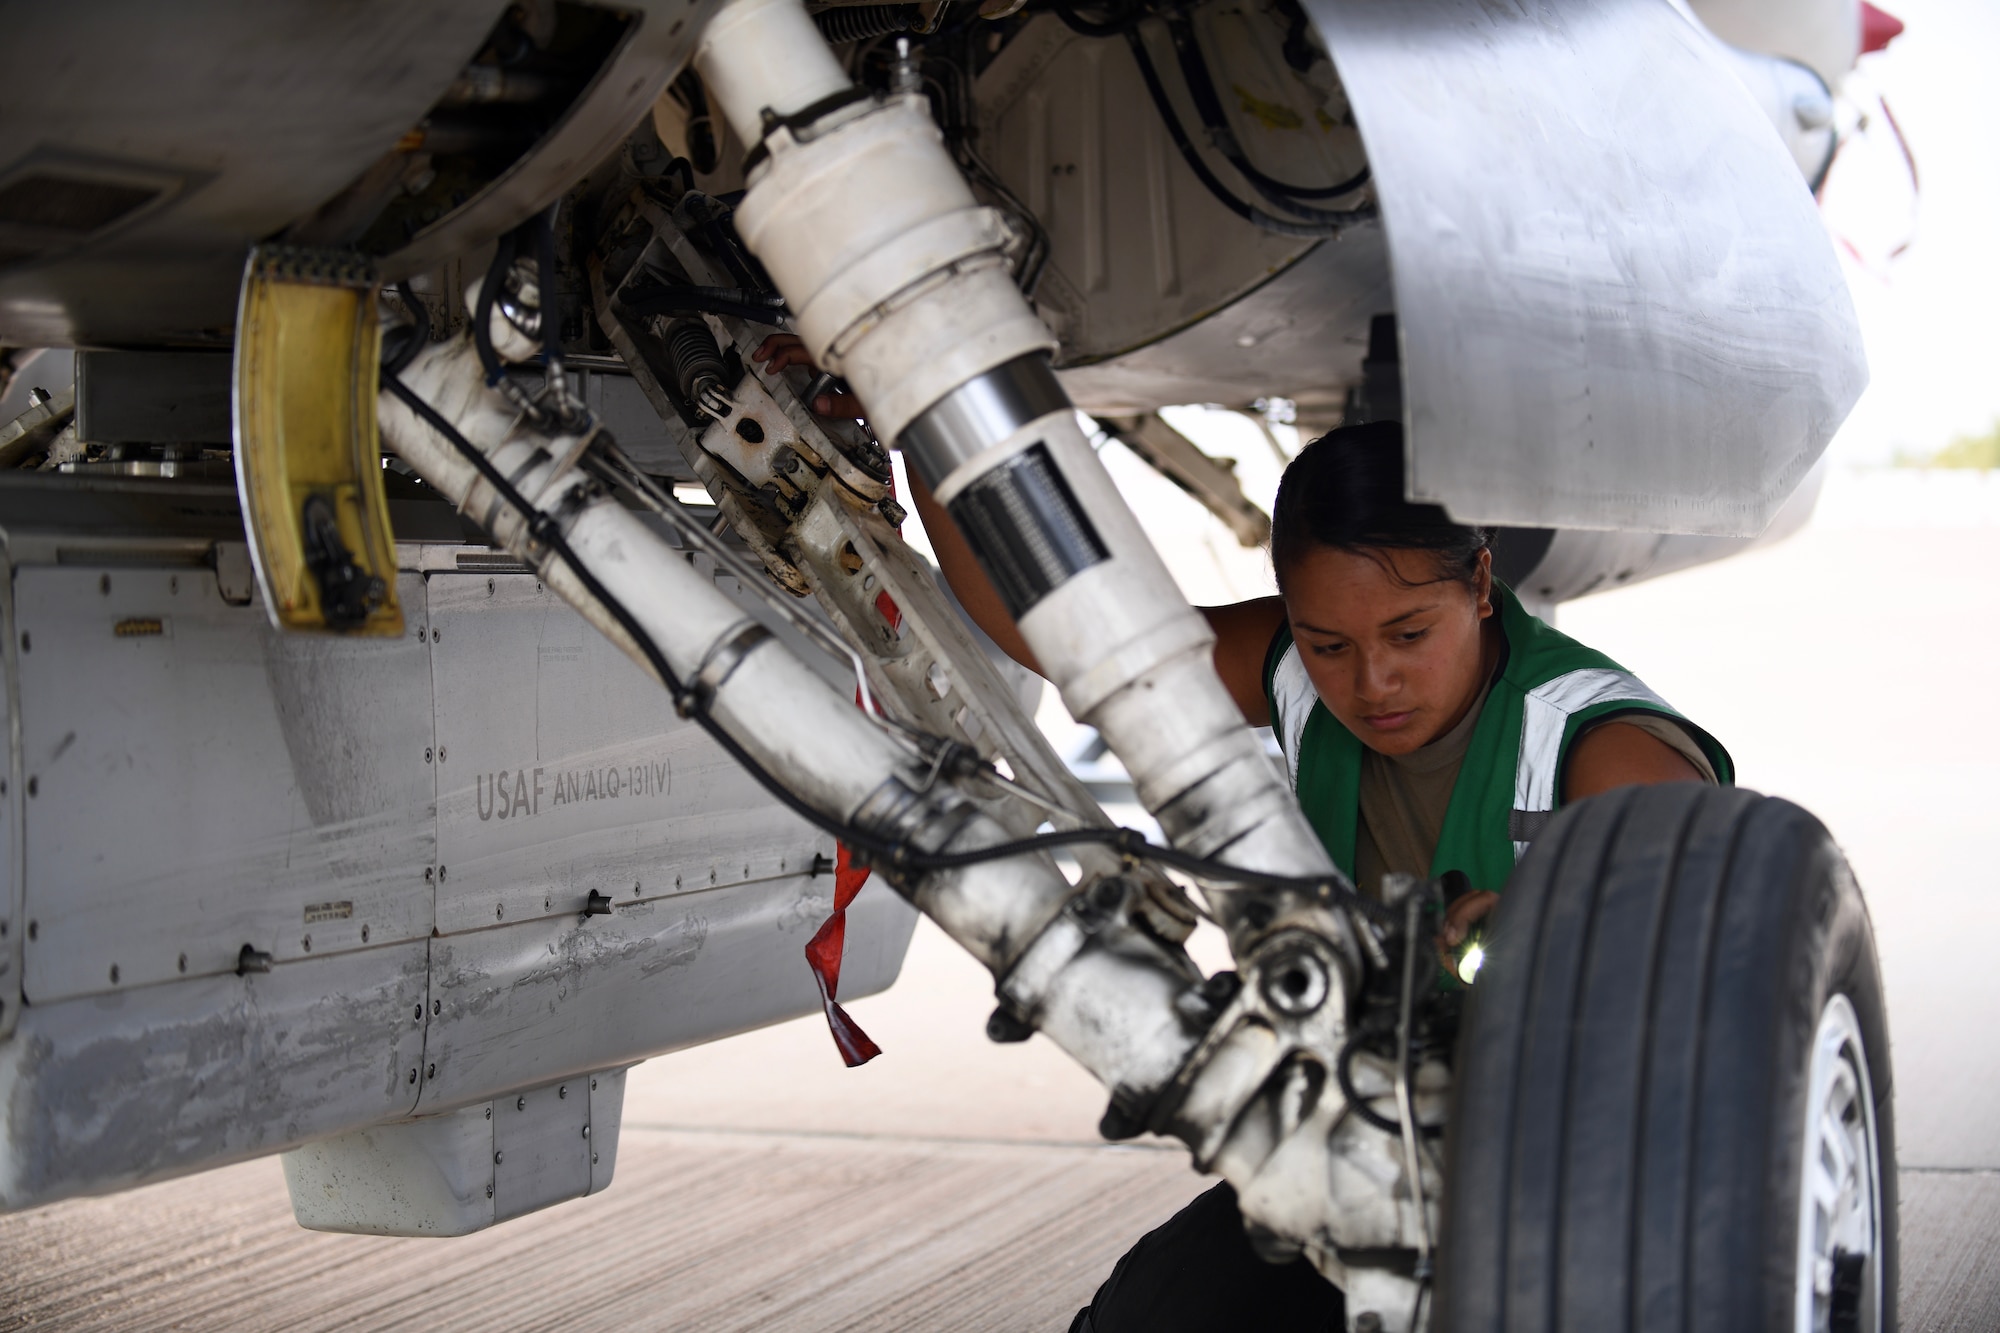 U.S. Air Force Airman 1st Class Caitlyn Reid, 555th Expeditionary Aircraft Maintenance Unit crew chief, inspects an F-16 Fighting Falcon, assigned to the 555th Expeditionary Fighter Squadron, Dec. 2, 2019 at Prince Sultan Air Base, Saudi Arabia.